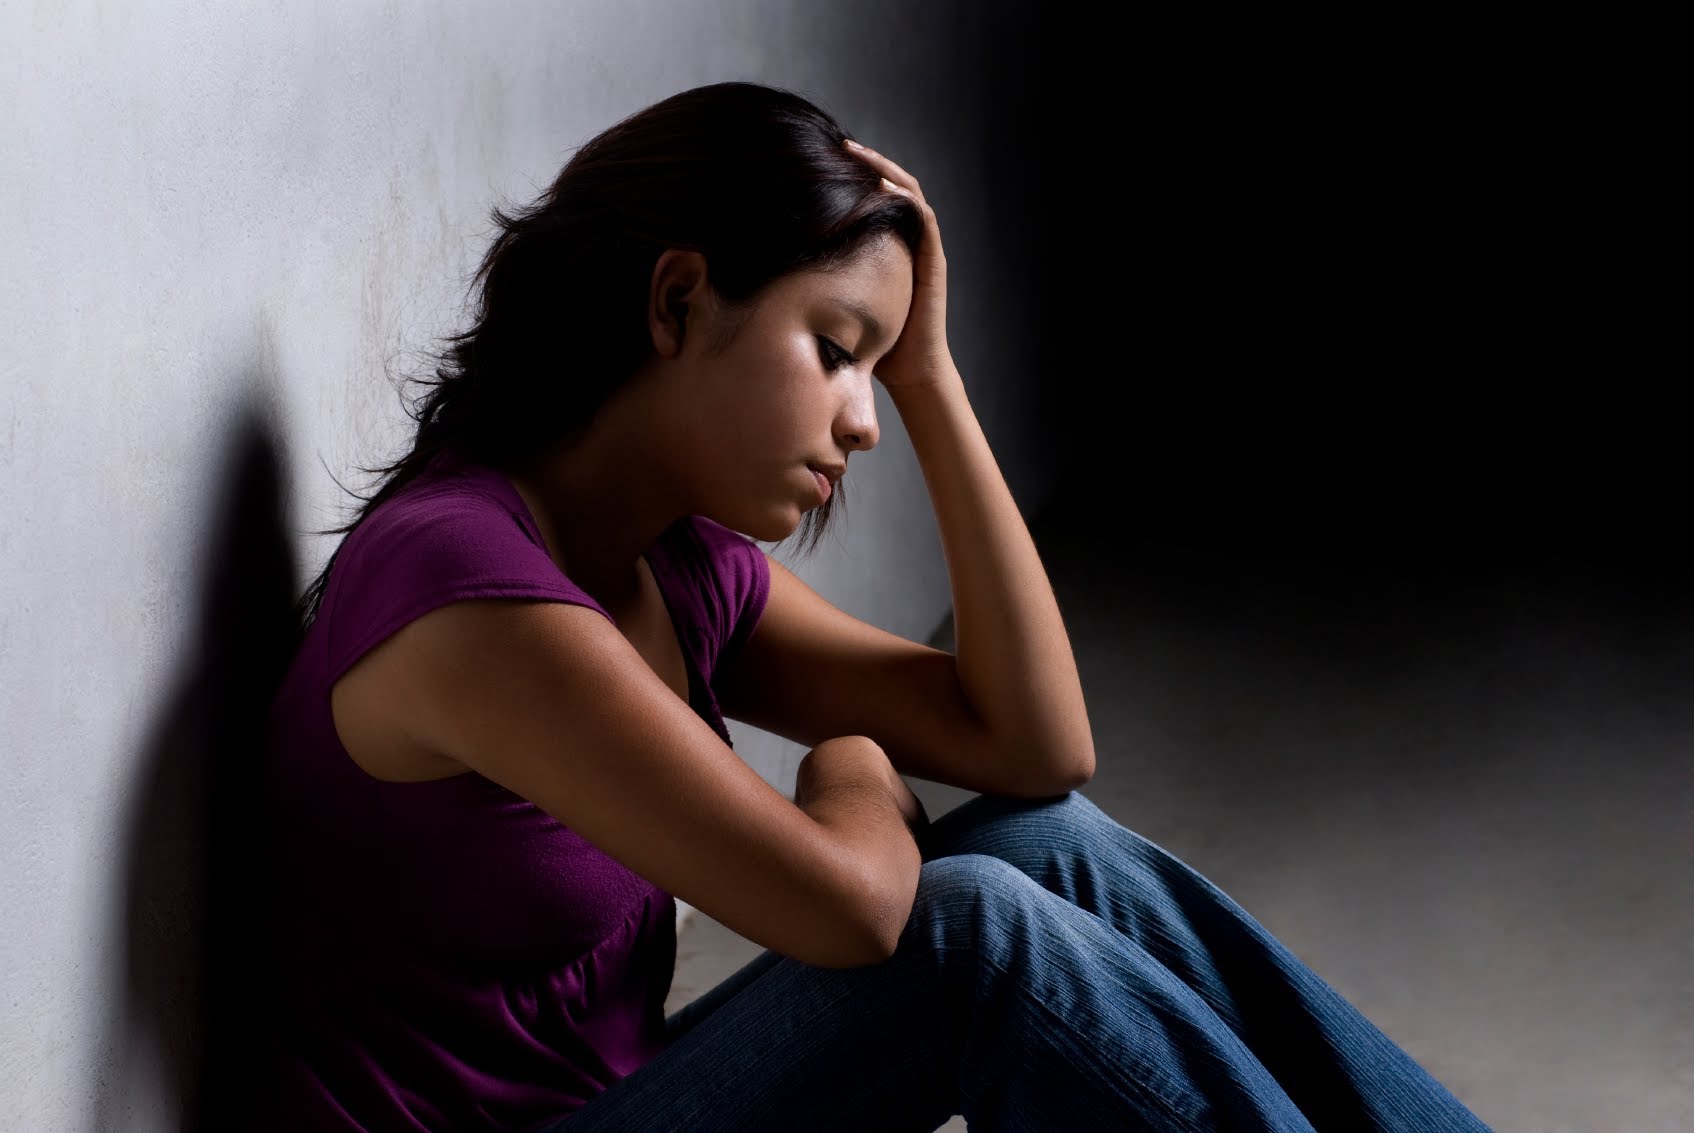 5 Healthy Ways to Cope With Depression